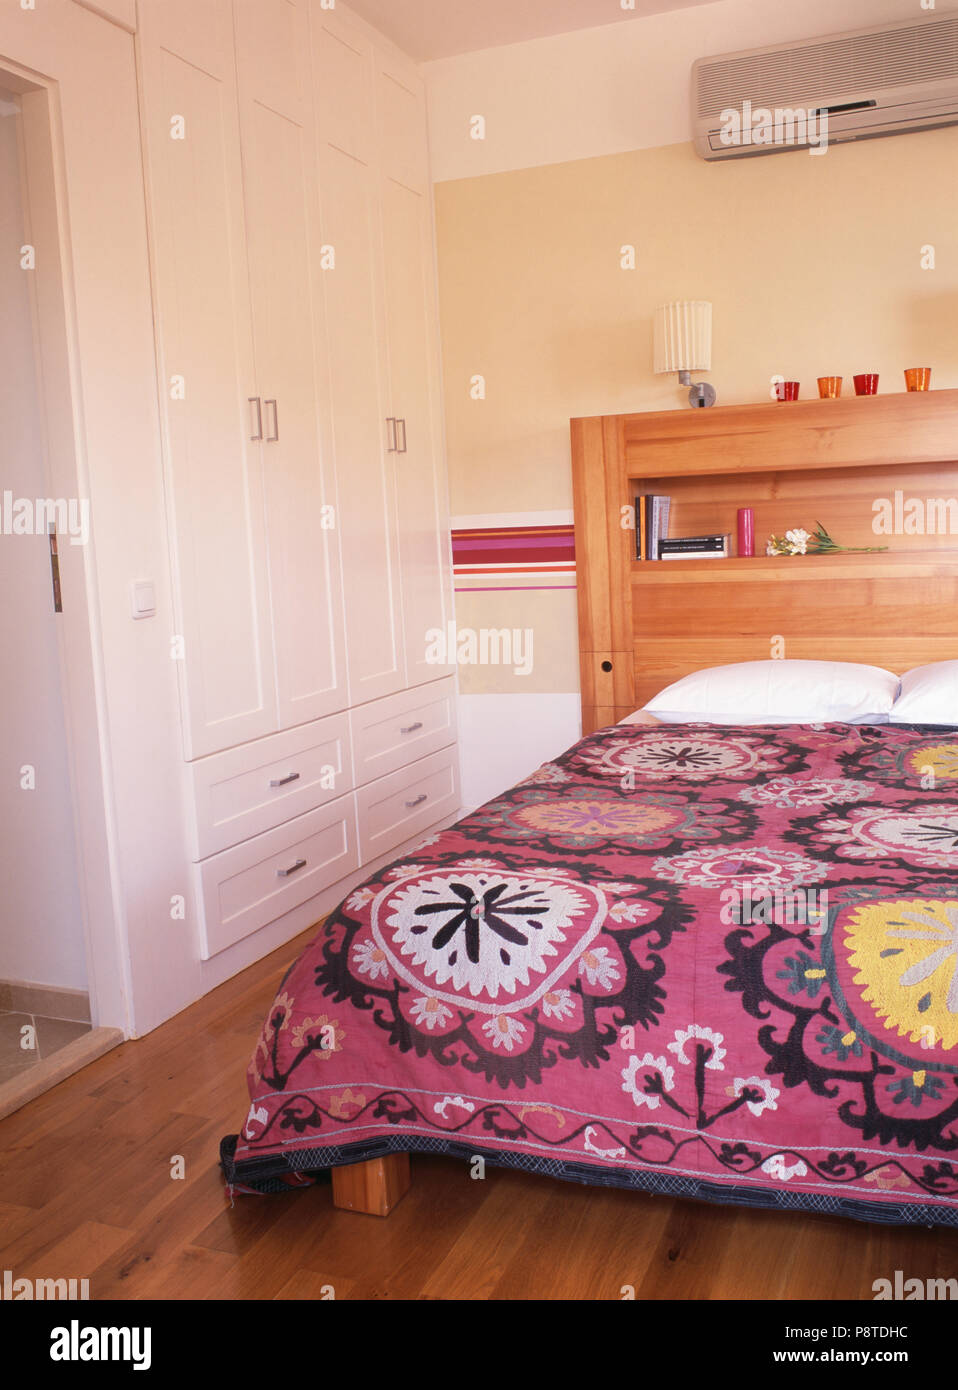 Air-conditioning on wall above fitted bed with patterned purple bedcover in coastal bedroom with fitted wardrobe Stock Photo